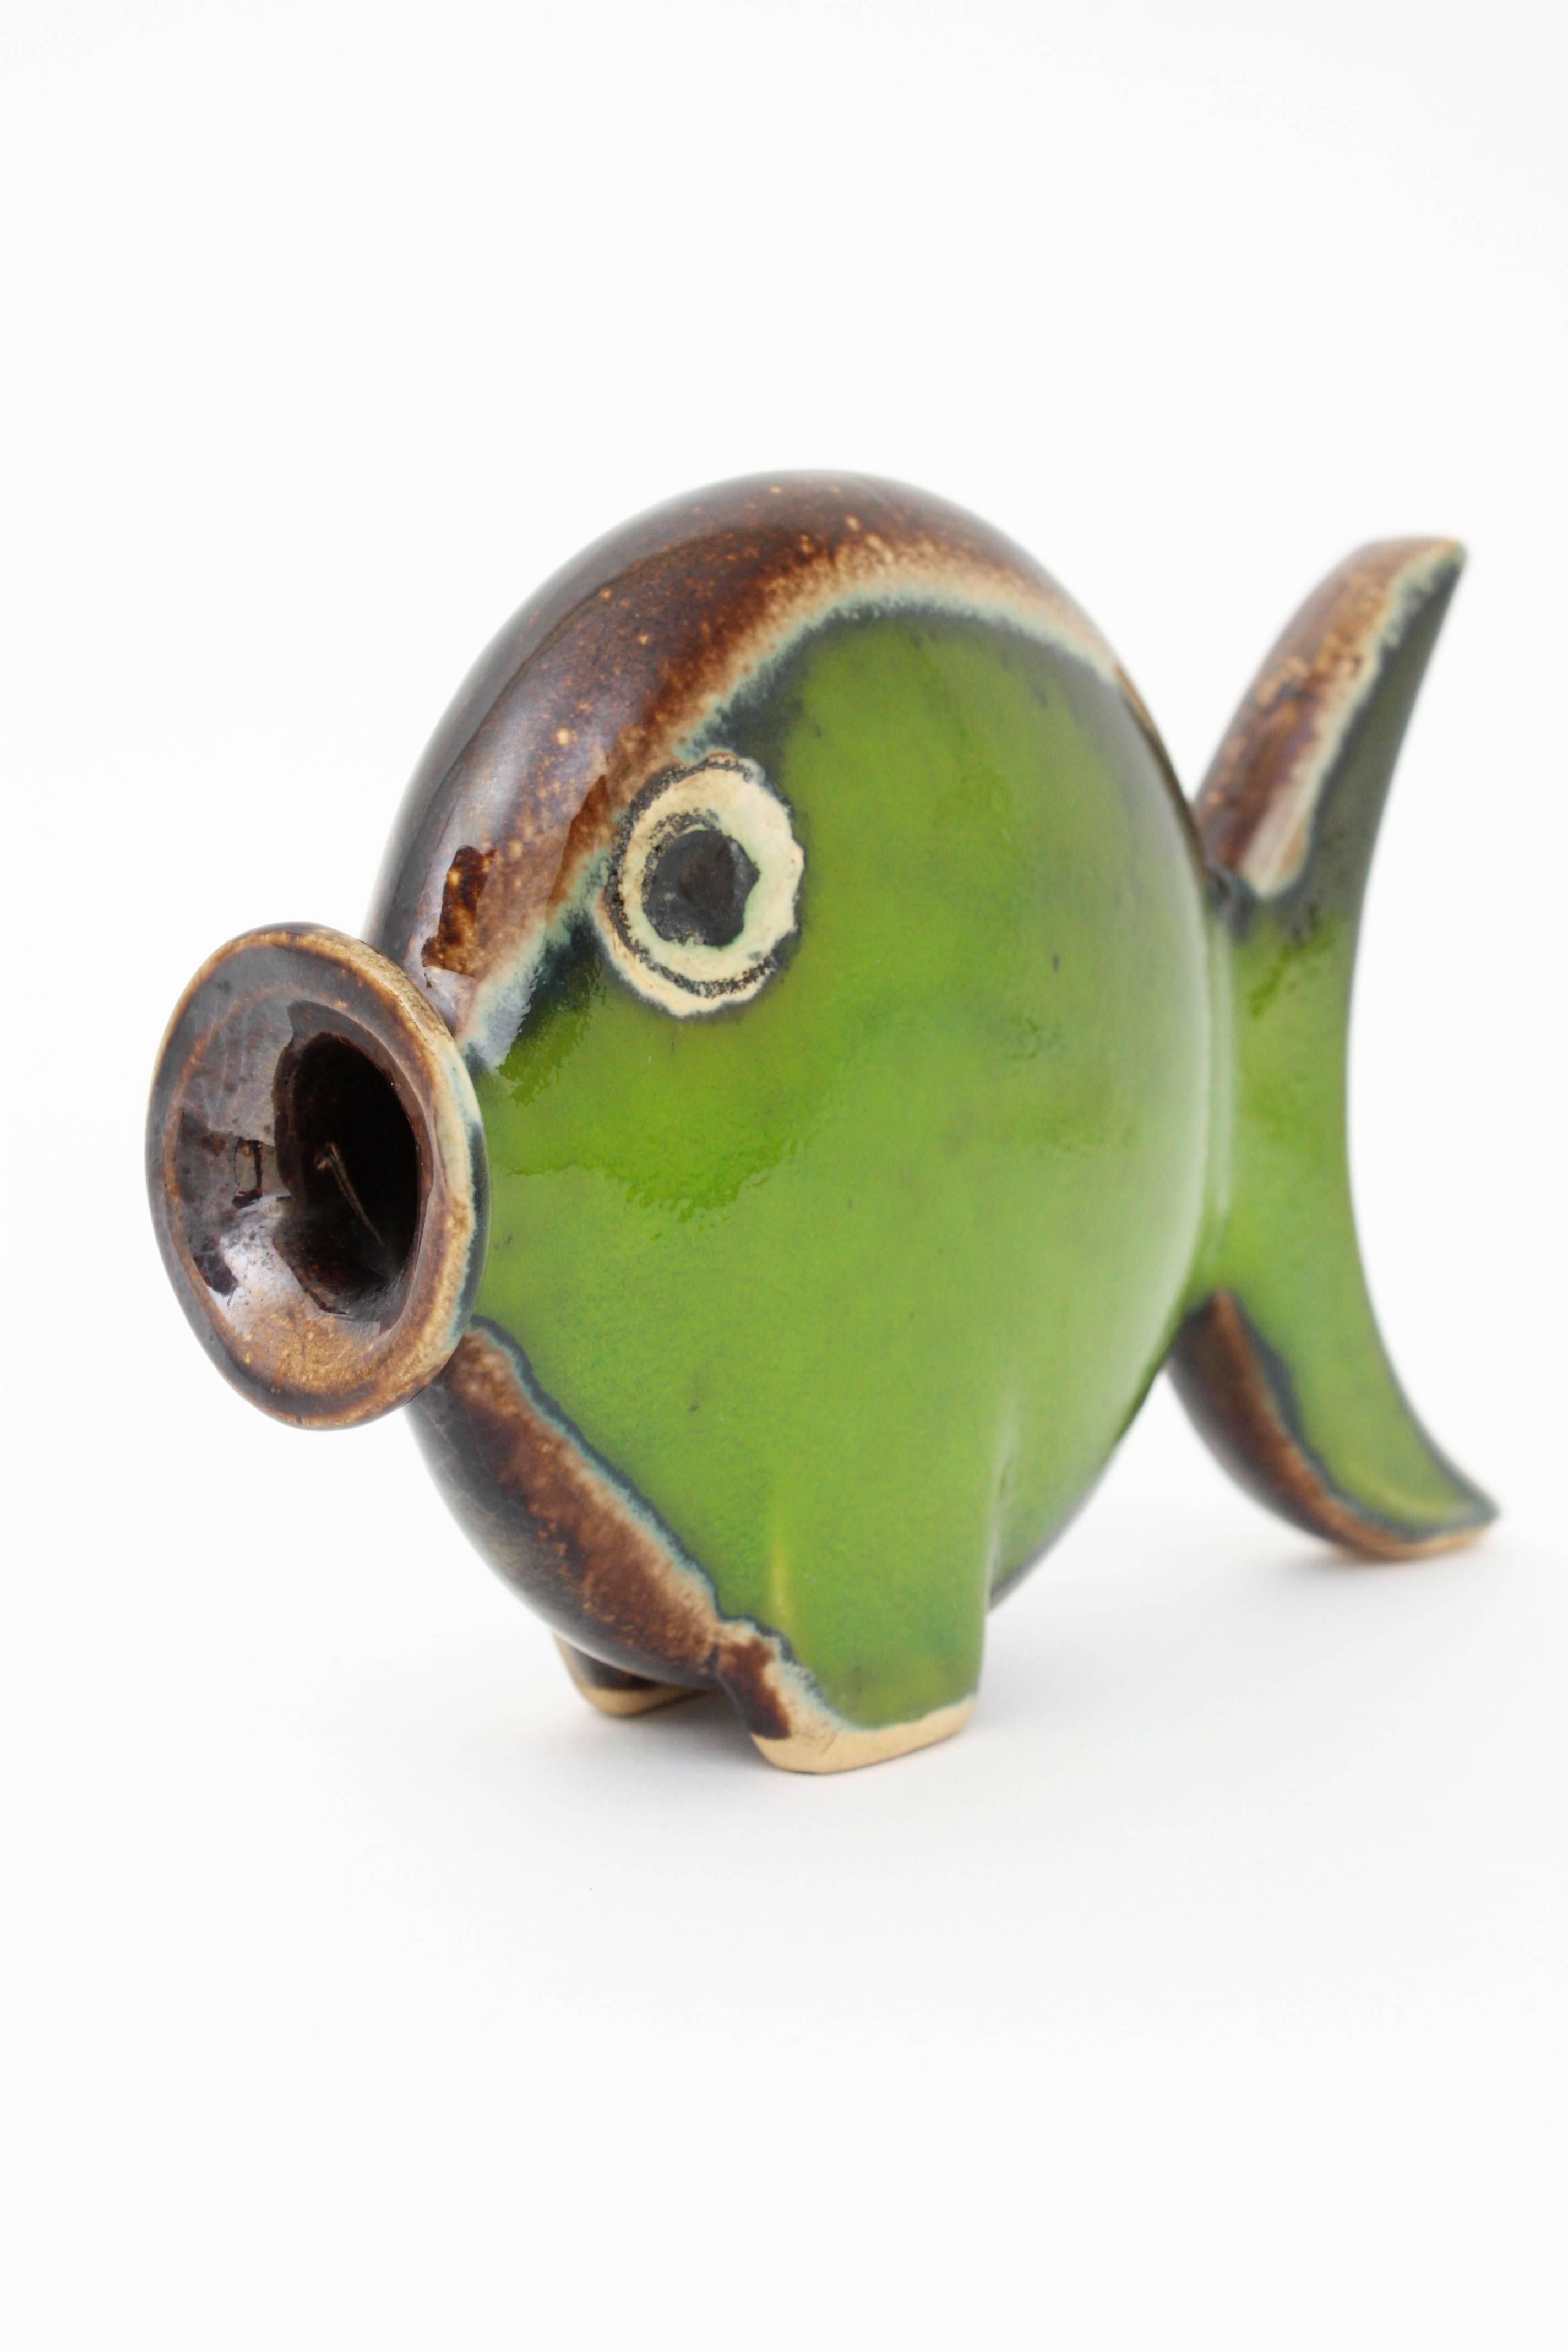 Eye-catching fish figurine made in glazed ceramic in green, white and brown colors, Spain, 1950s.
Beautiful to place with other ceramic pieces creating a set with other ceramic pieces.
Perfect as a gift idea
Measures: 17 cm W x 12 cm H x 5 cm